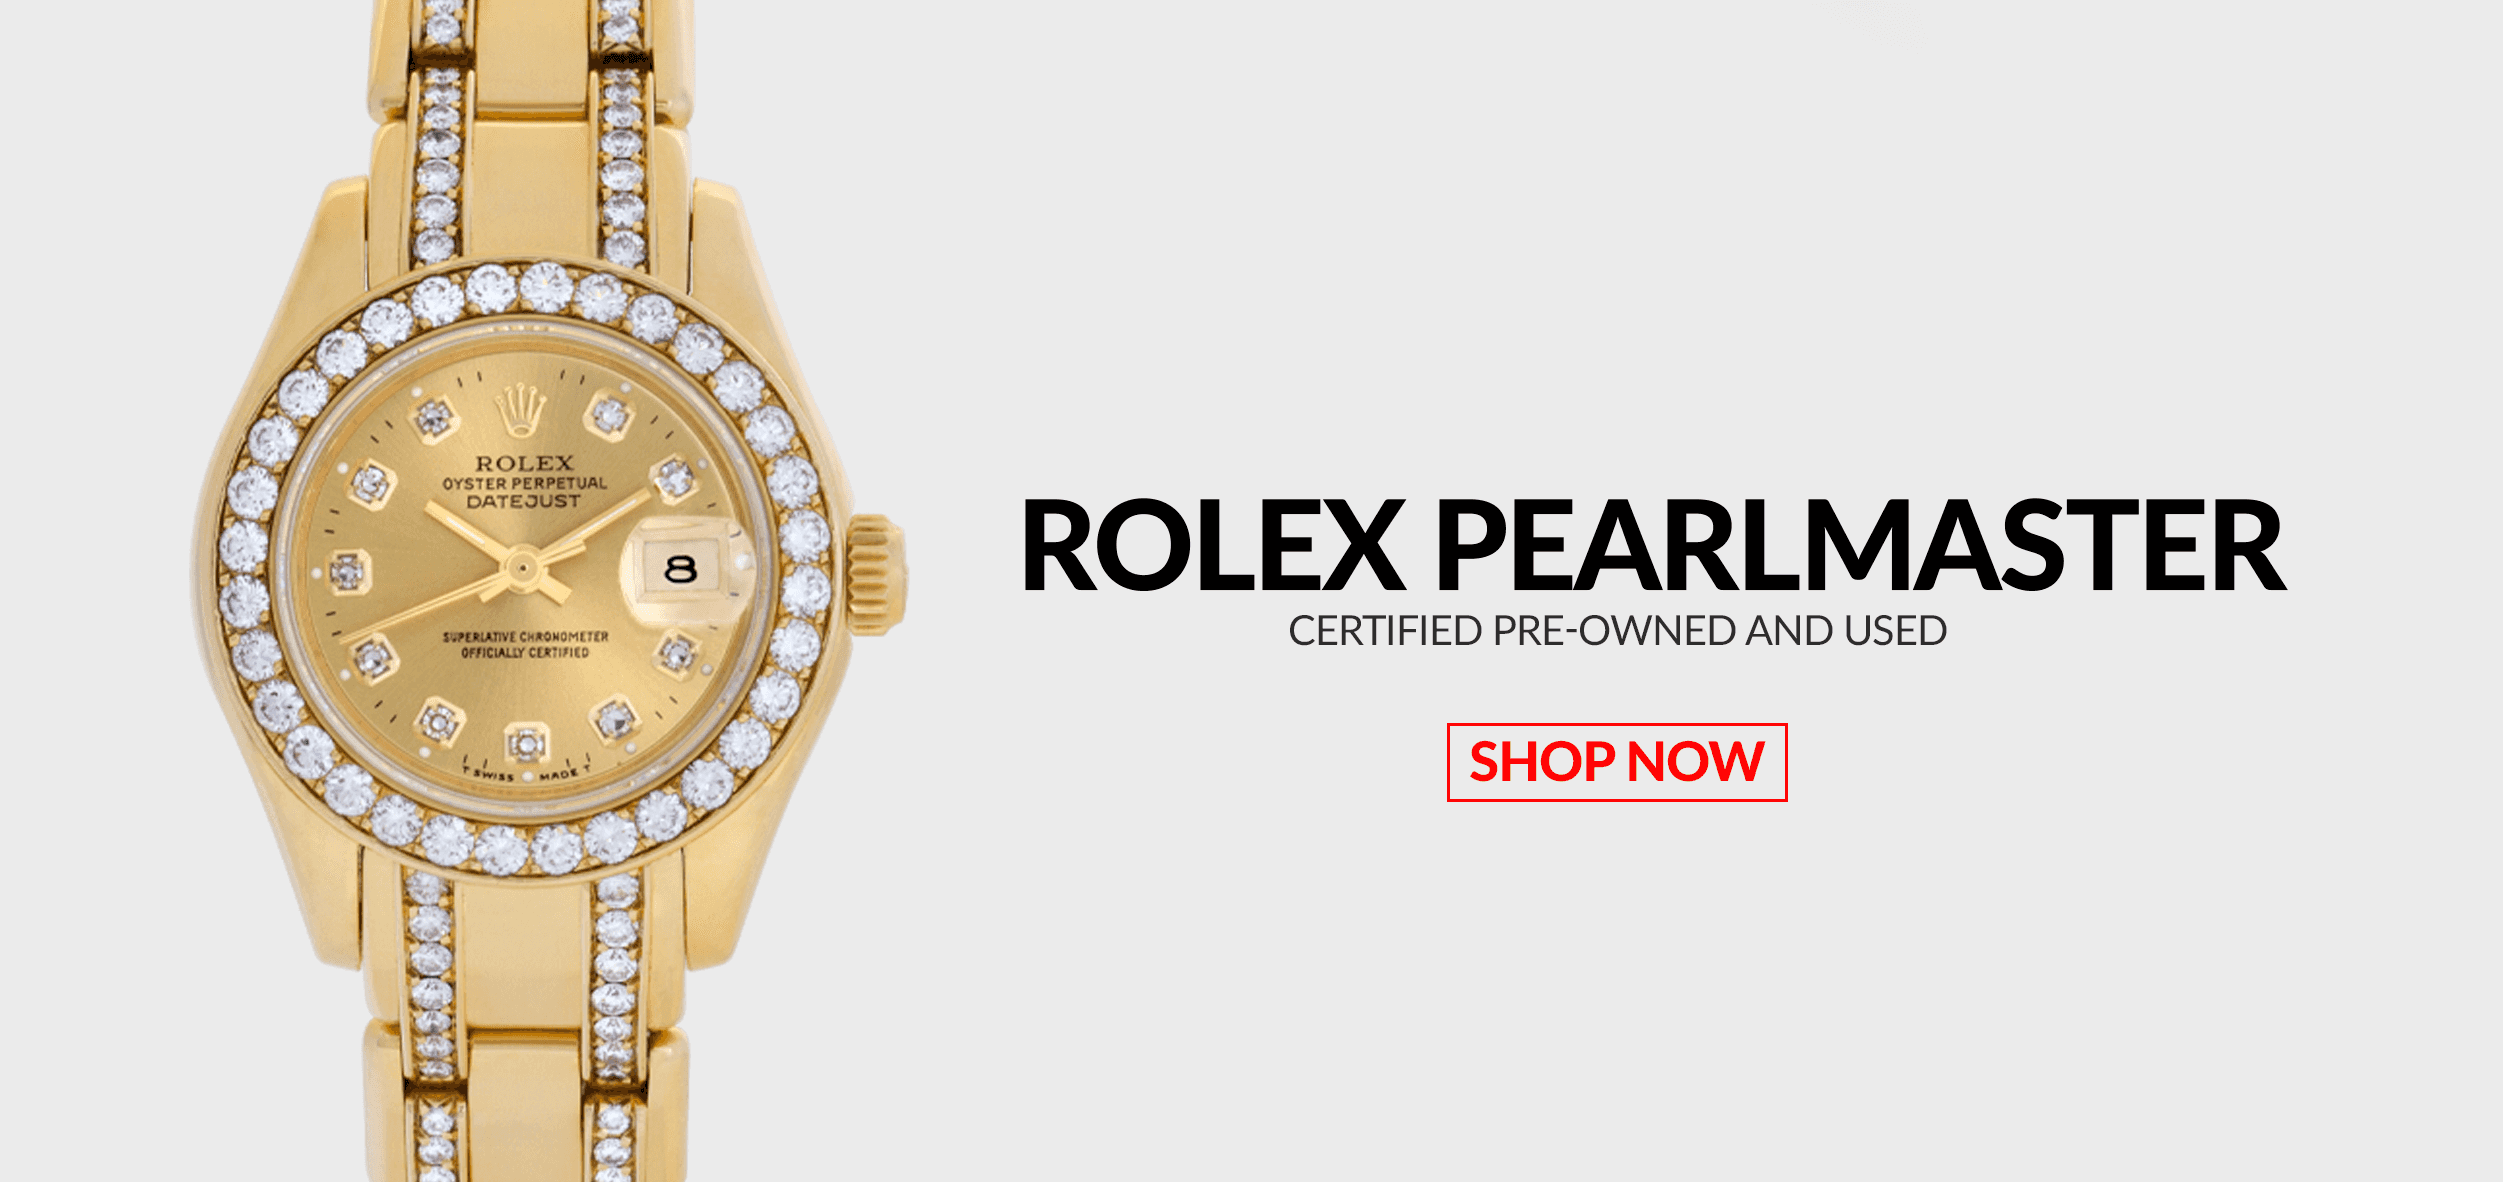 Pre-Owned Certified Used Rolex Pearlmaster Watches Header